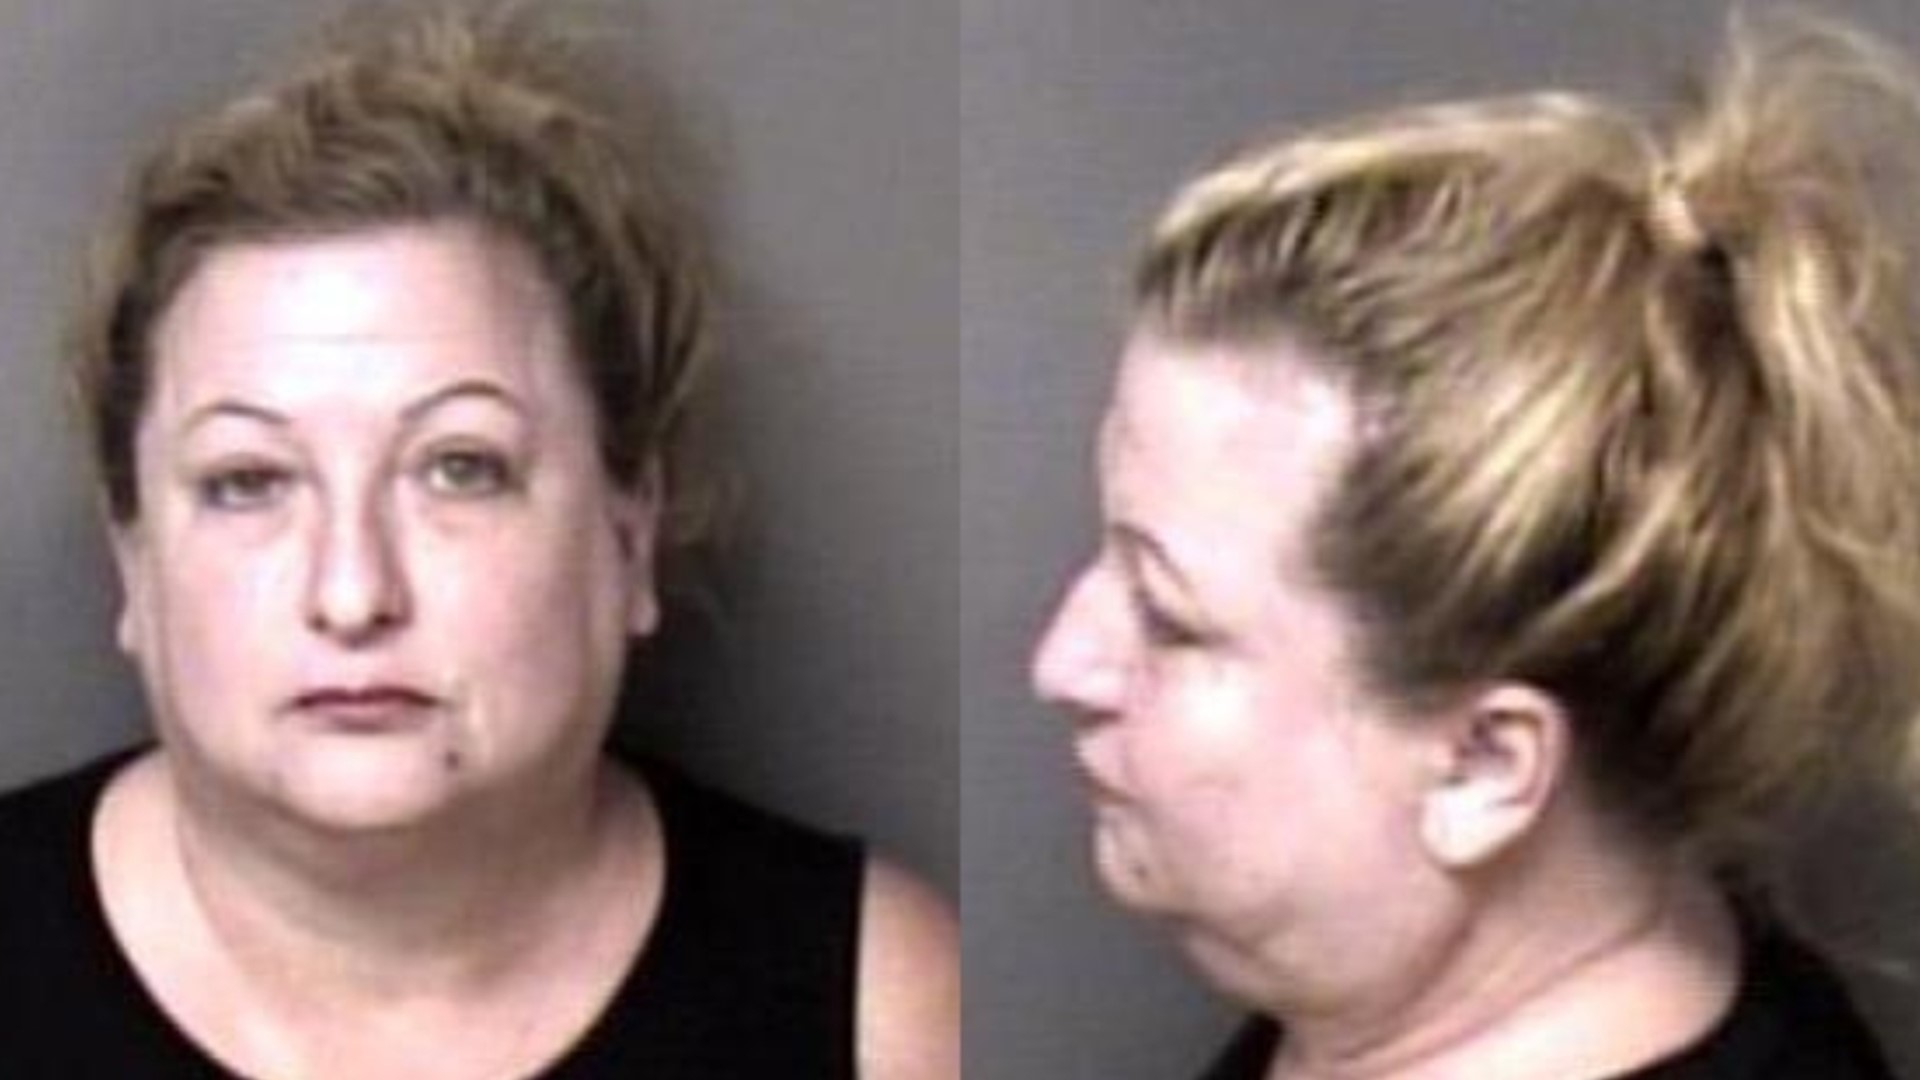 Anita McCall charged with drunk driving | wcnc.com